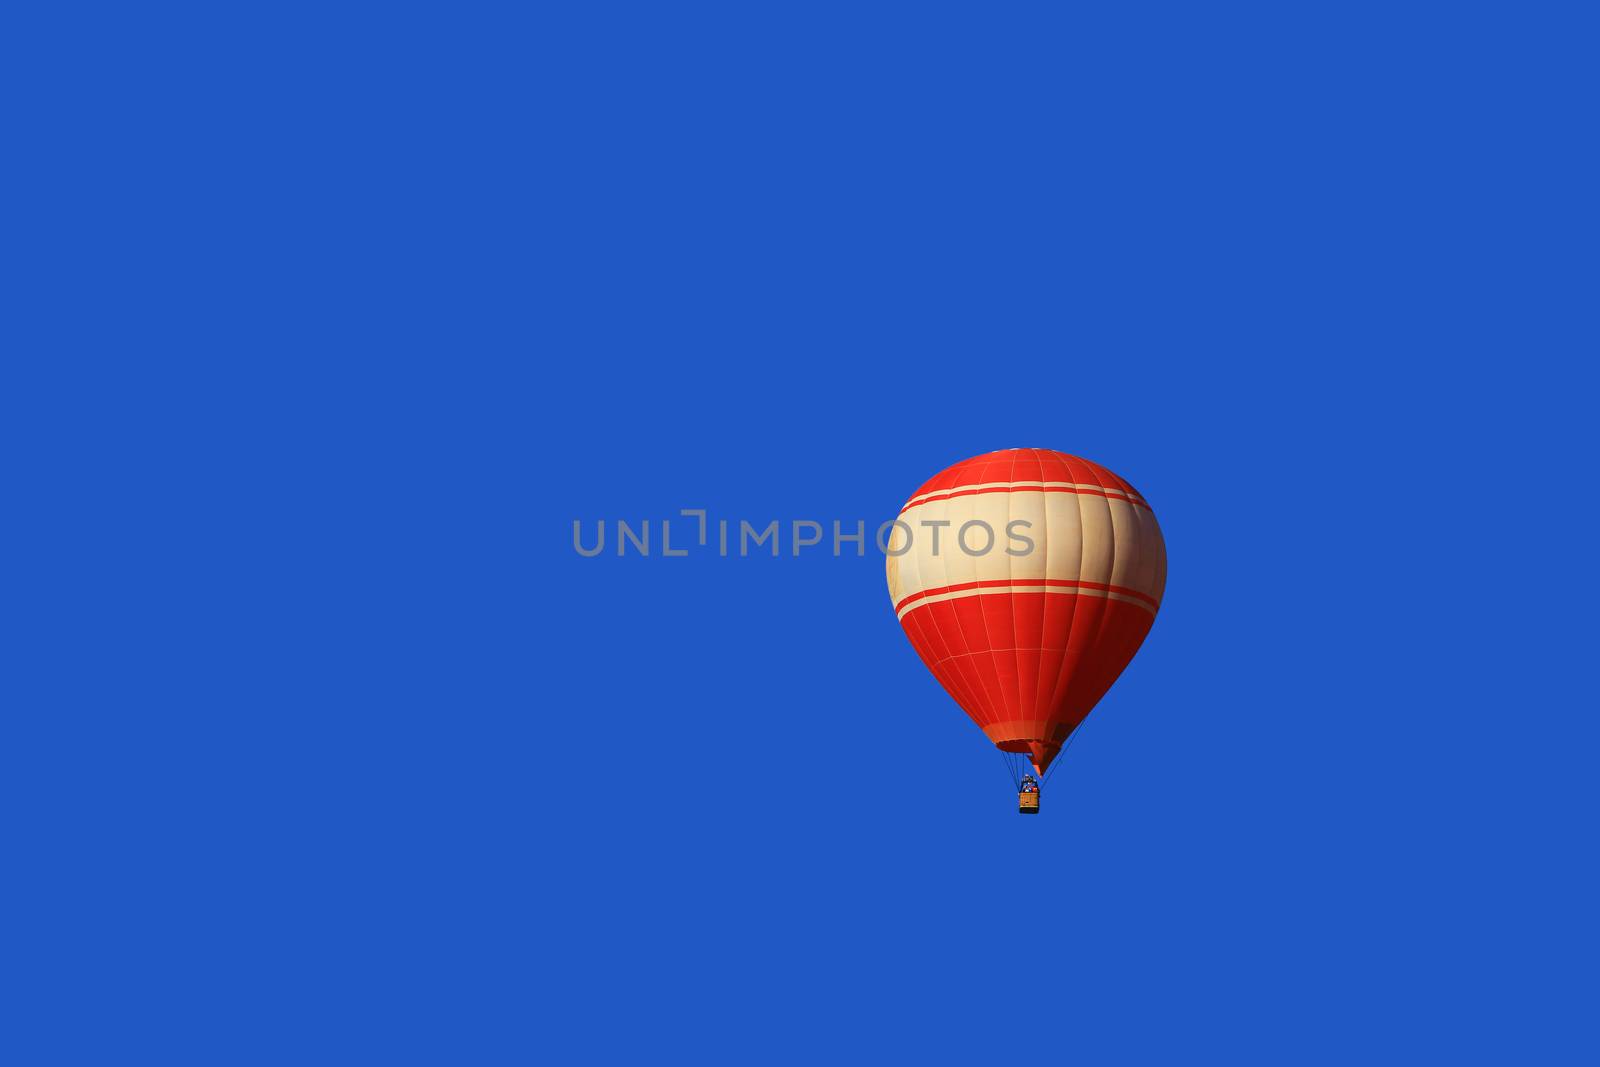 A red balloon floats on blue sky background in Vang Vieng, Laos by Mercedess